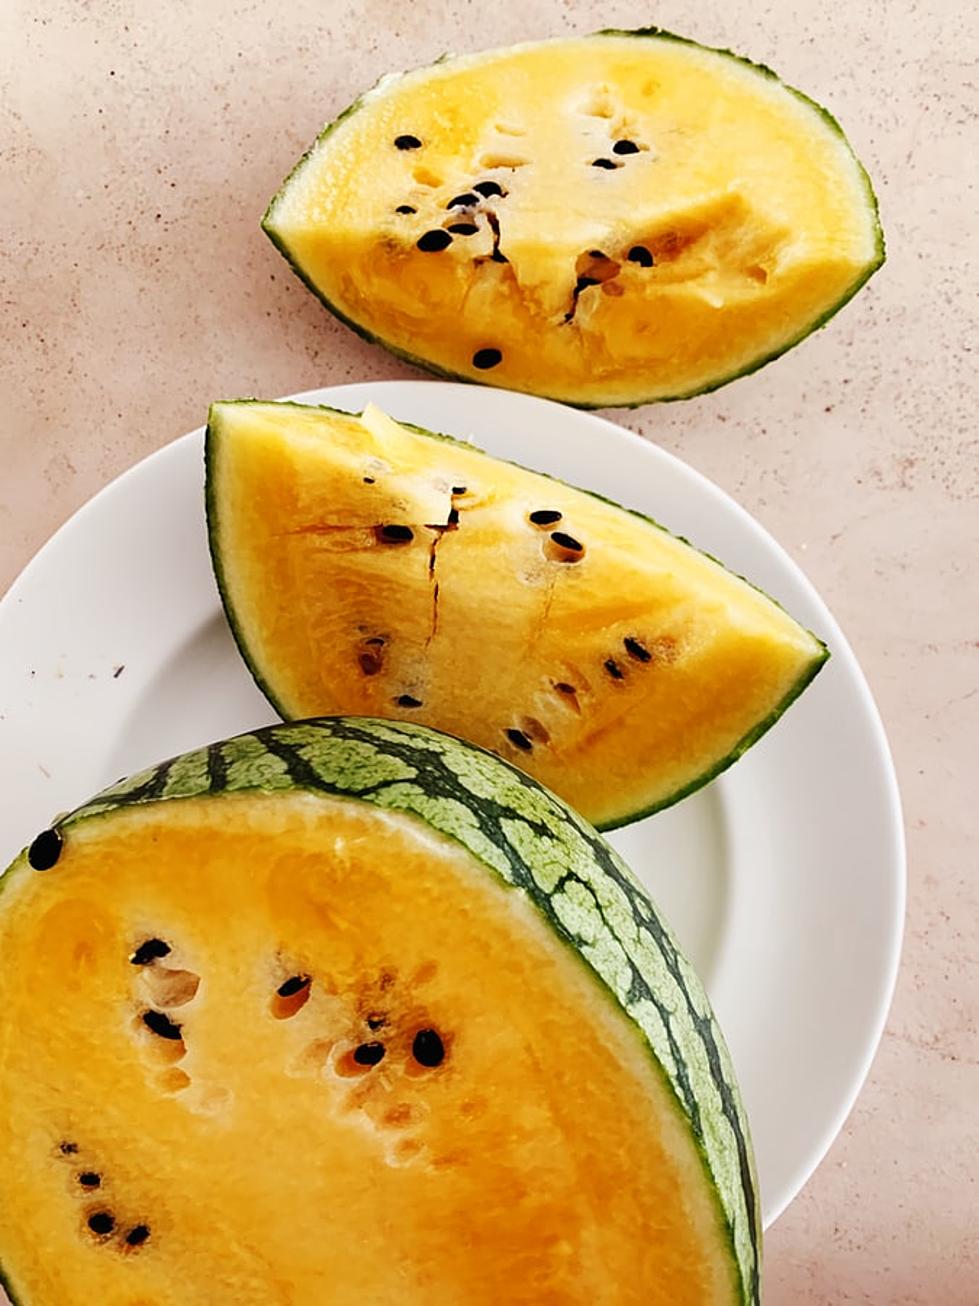 Believe It Or Not, This Watermelon Is Supposed To Be Yellow